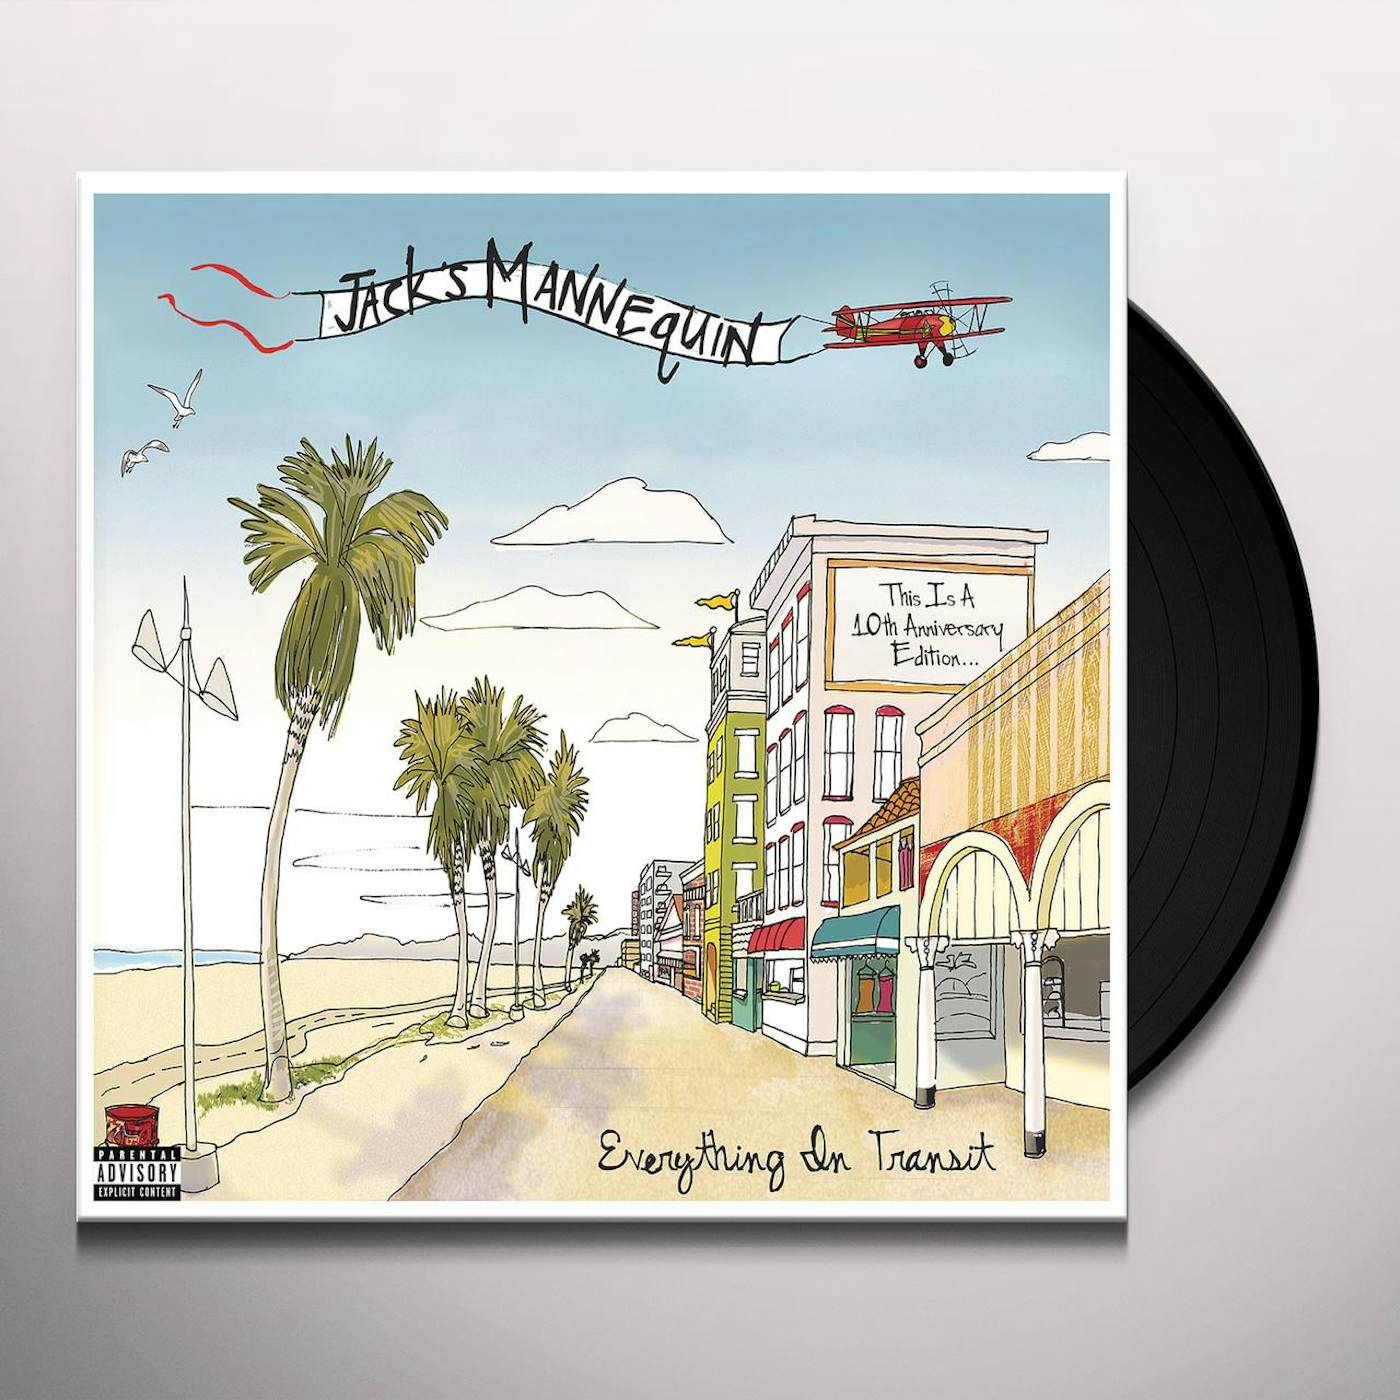 Jack's Mannequin Everything In Transit (10th Anniversary Edition) Vinyl Record